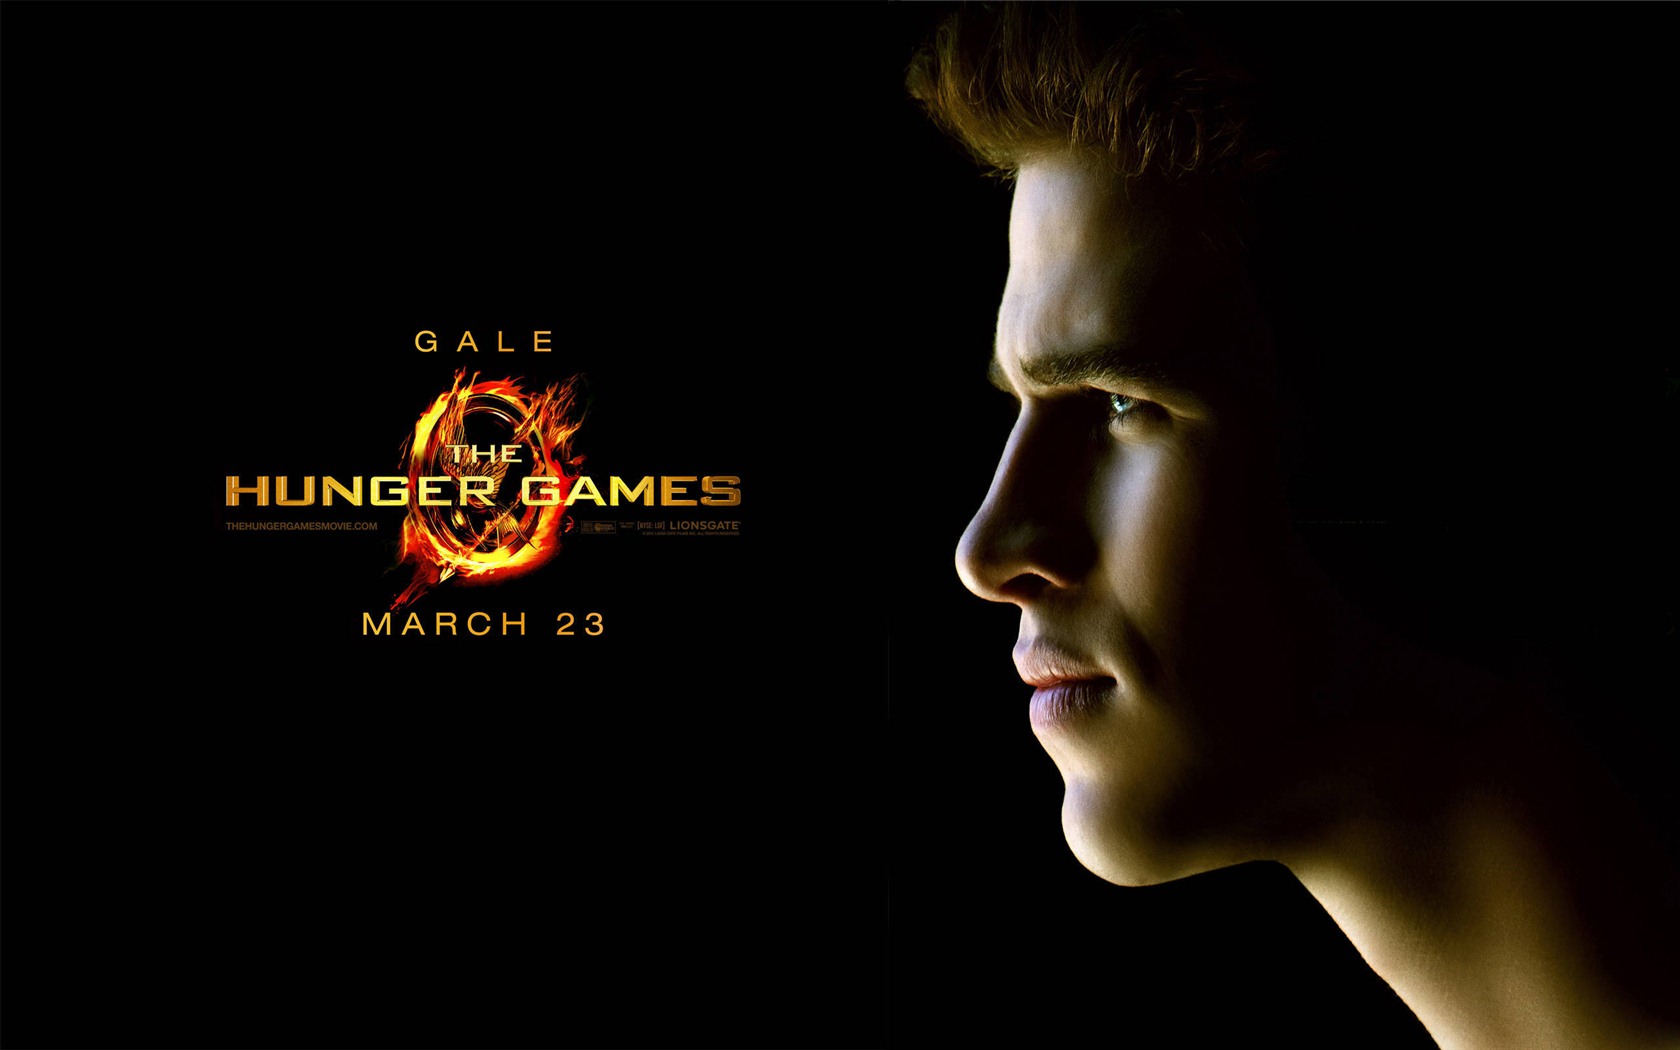 The Hunger Games HD wallpapers #4 - 1680x1050